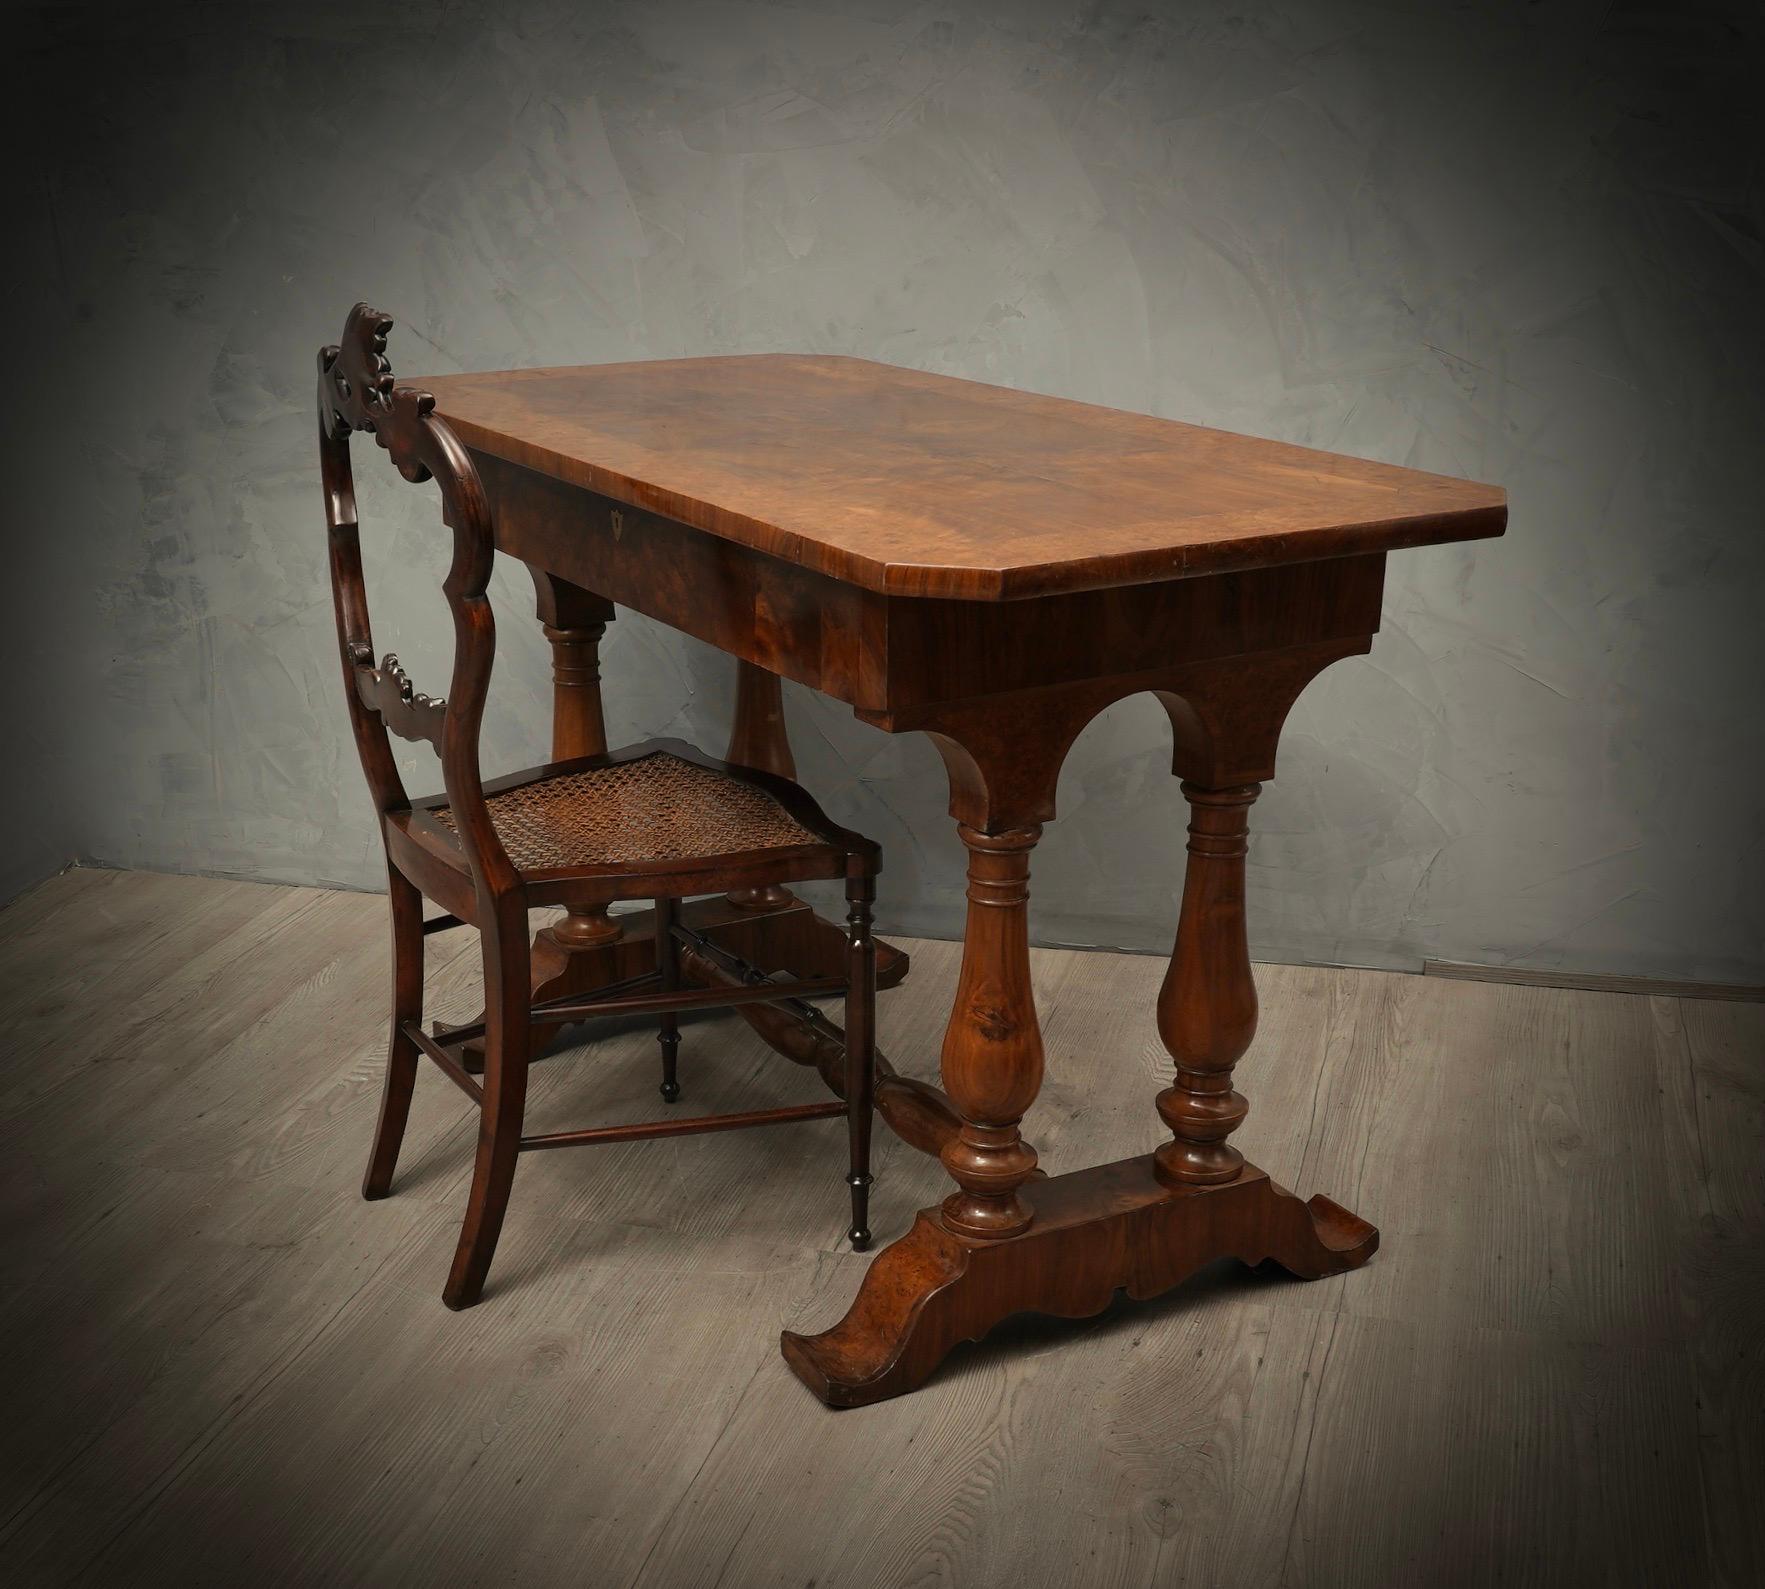 Biedermeier desk from the early 1800s, rich and elaborate in its forms.

All veneered in walnut wood, with inlays in poplar briar wood. The top is well square but its corners are cut straight and do not form a corner. In addition it is veneered in